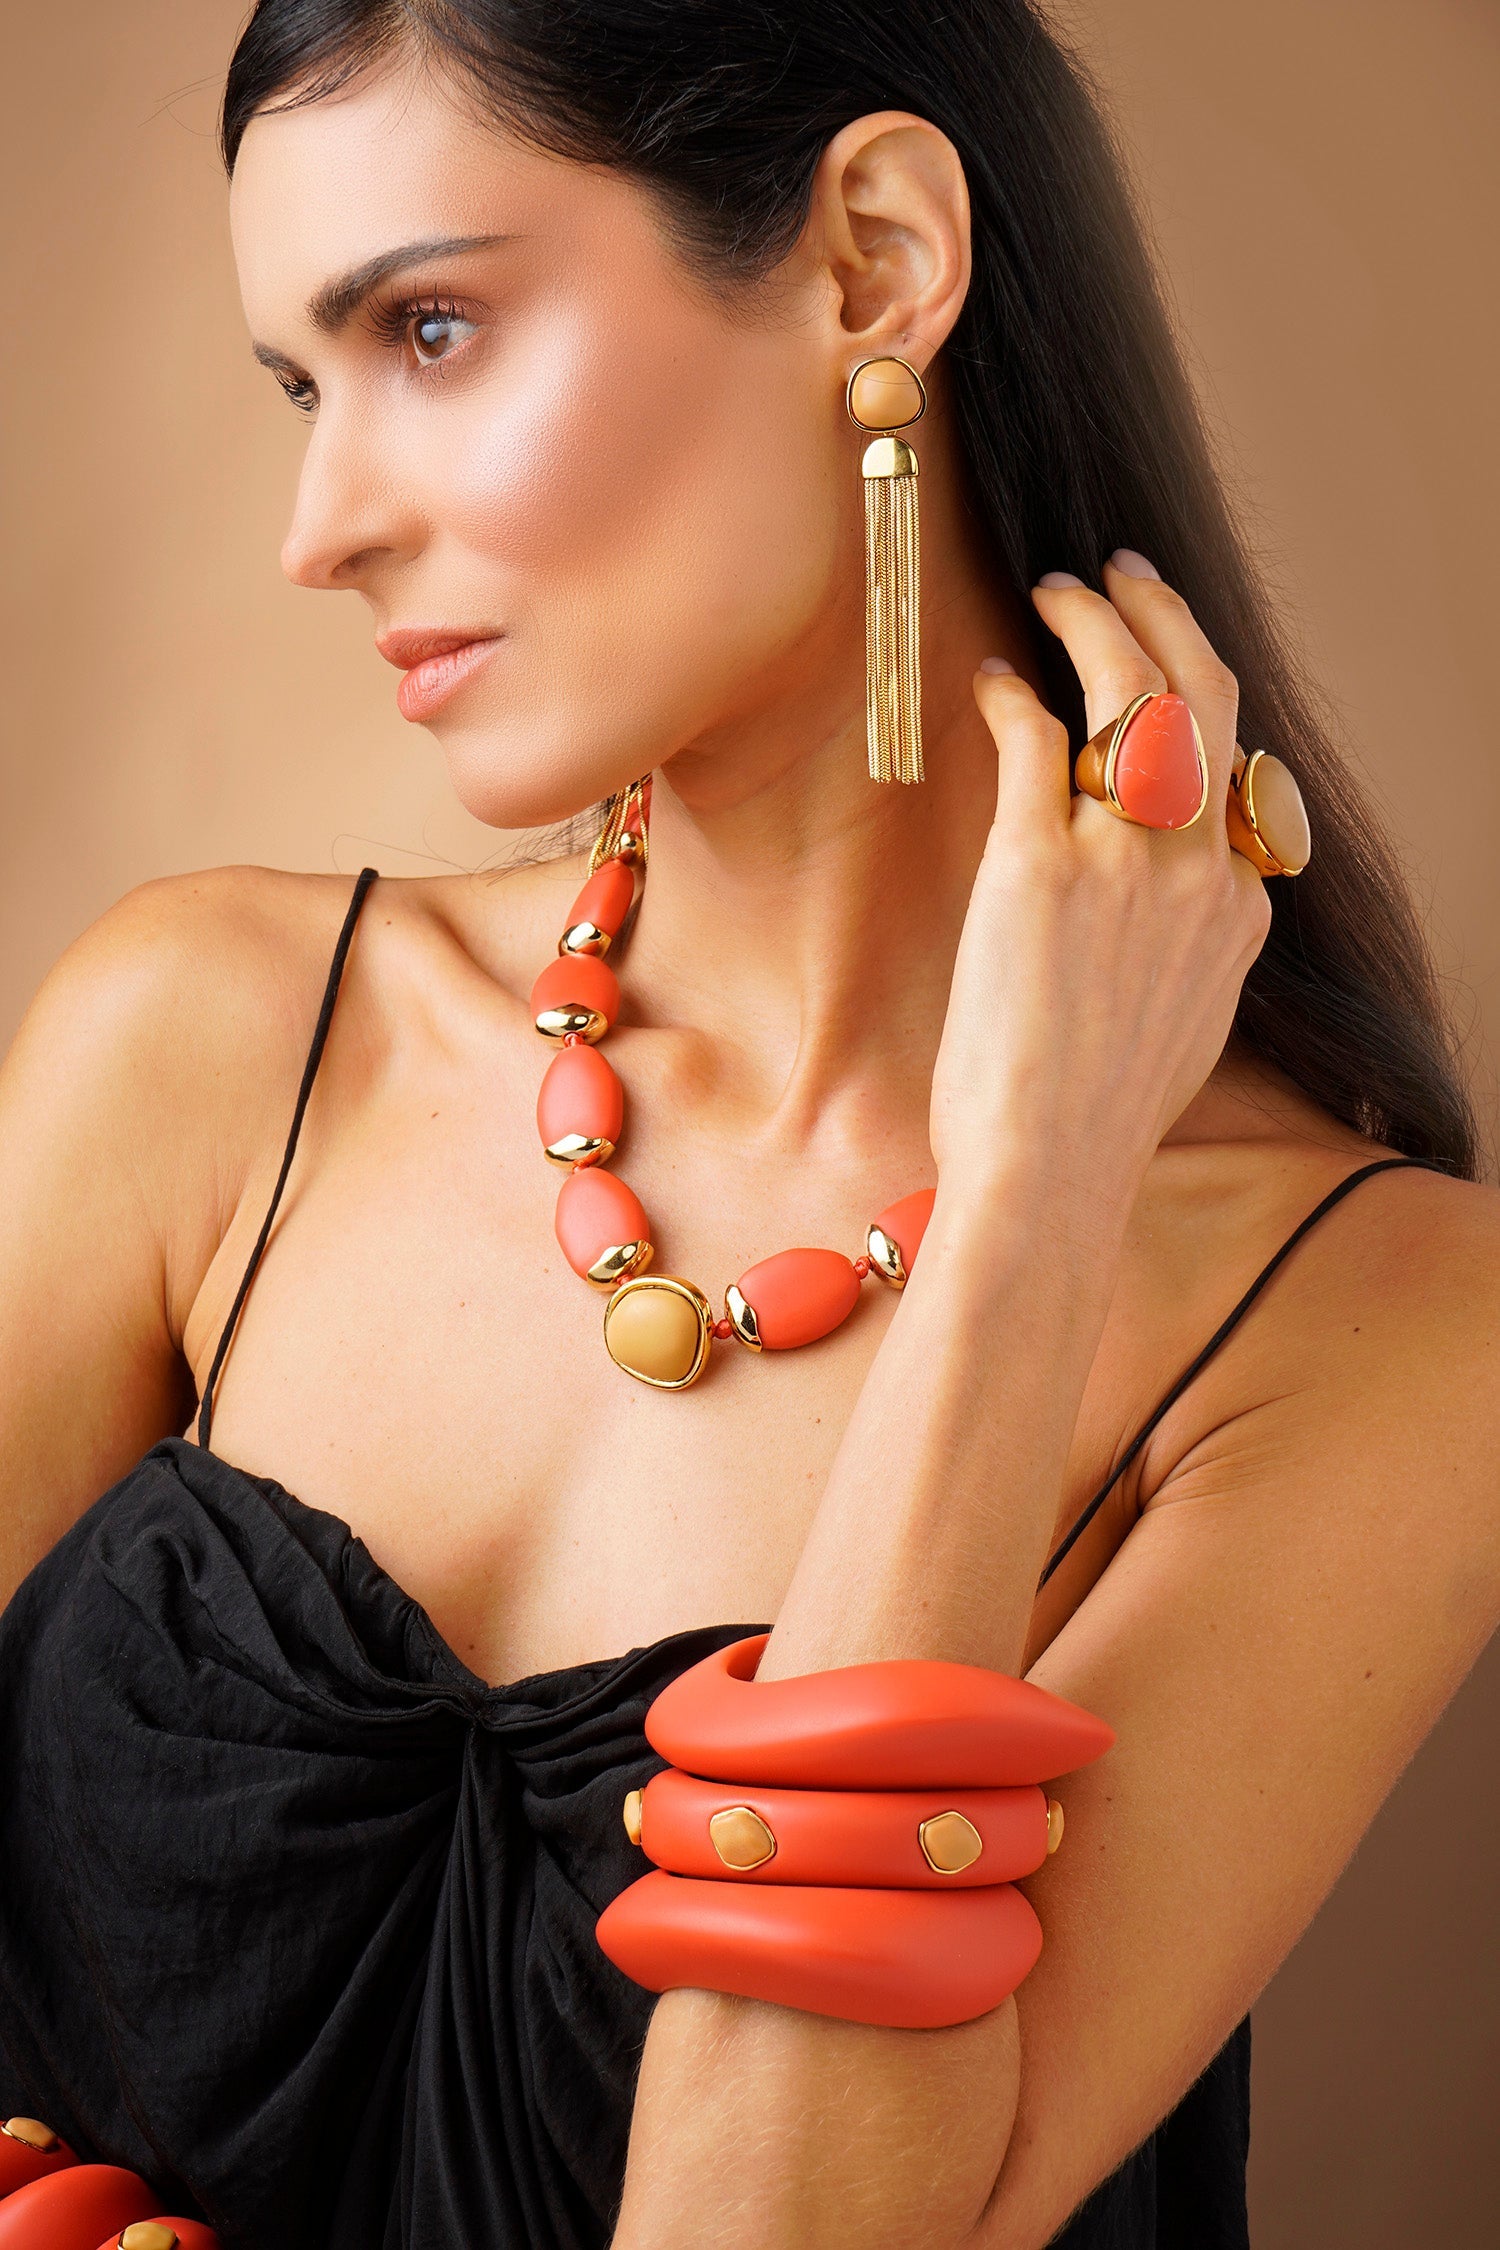 Multi Stone Resin Bangle - Coral and Beige